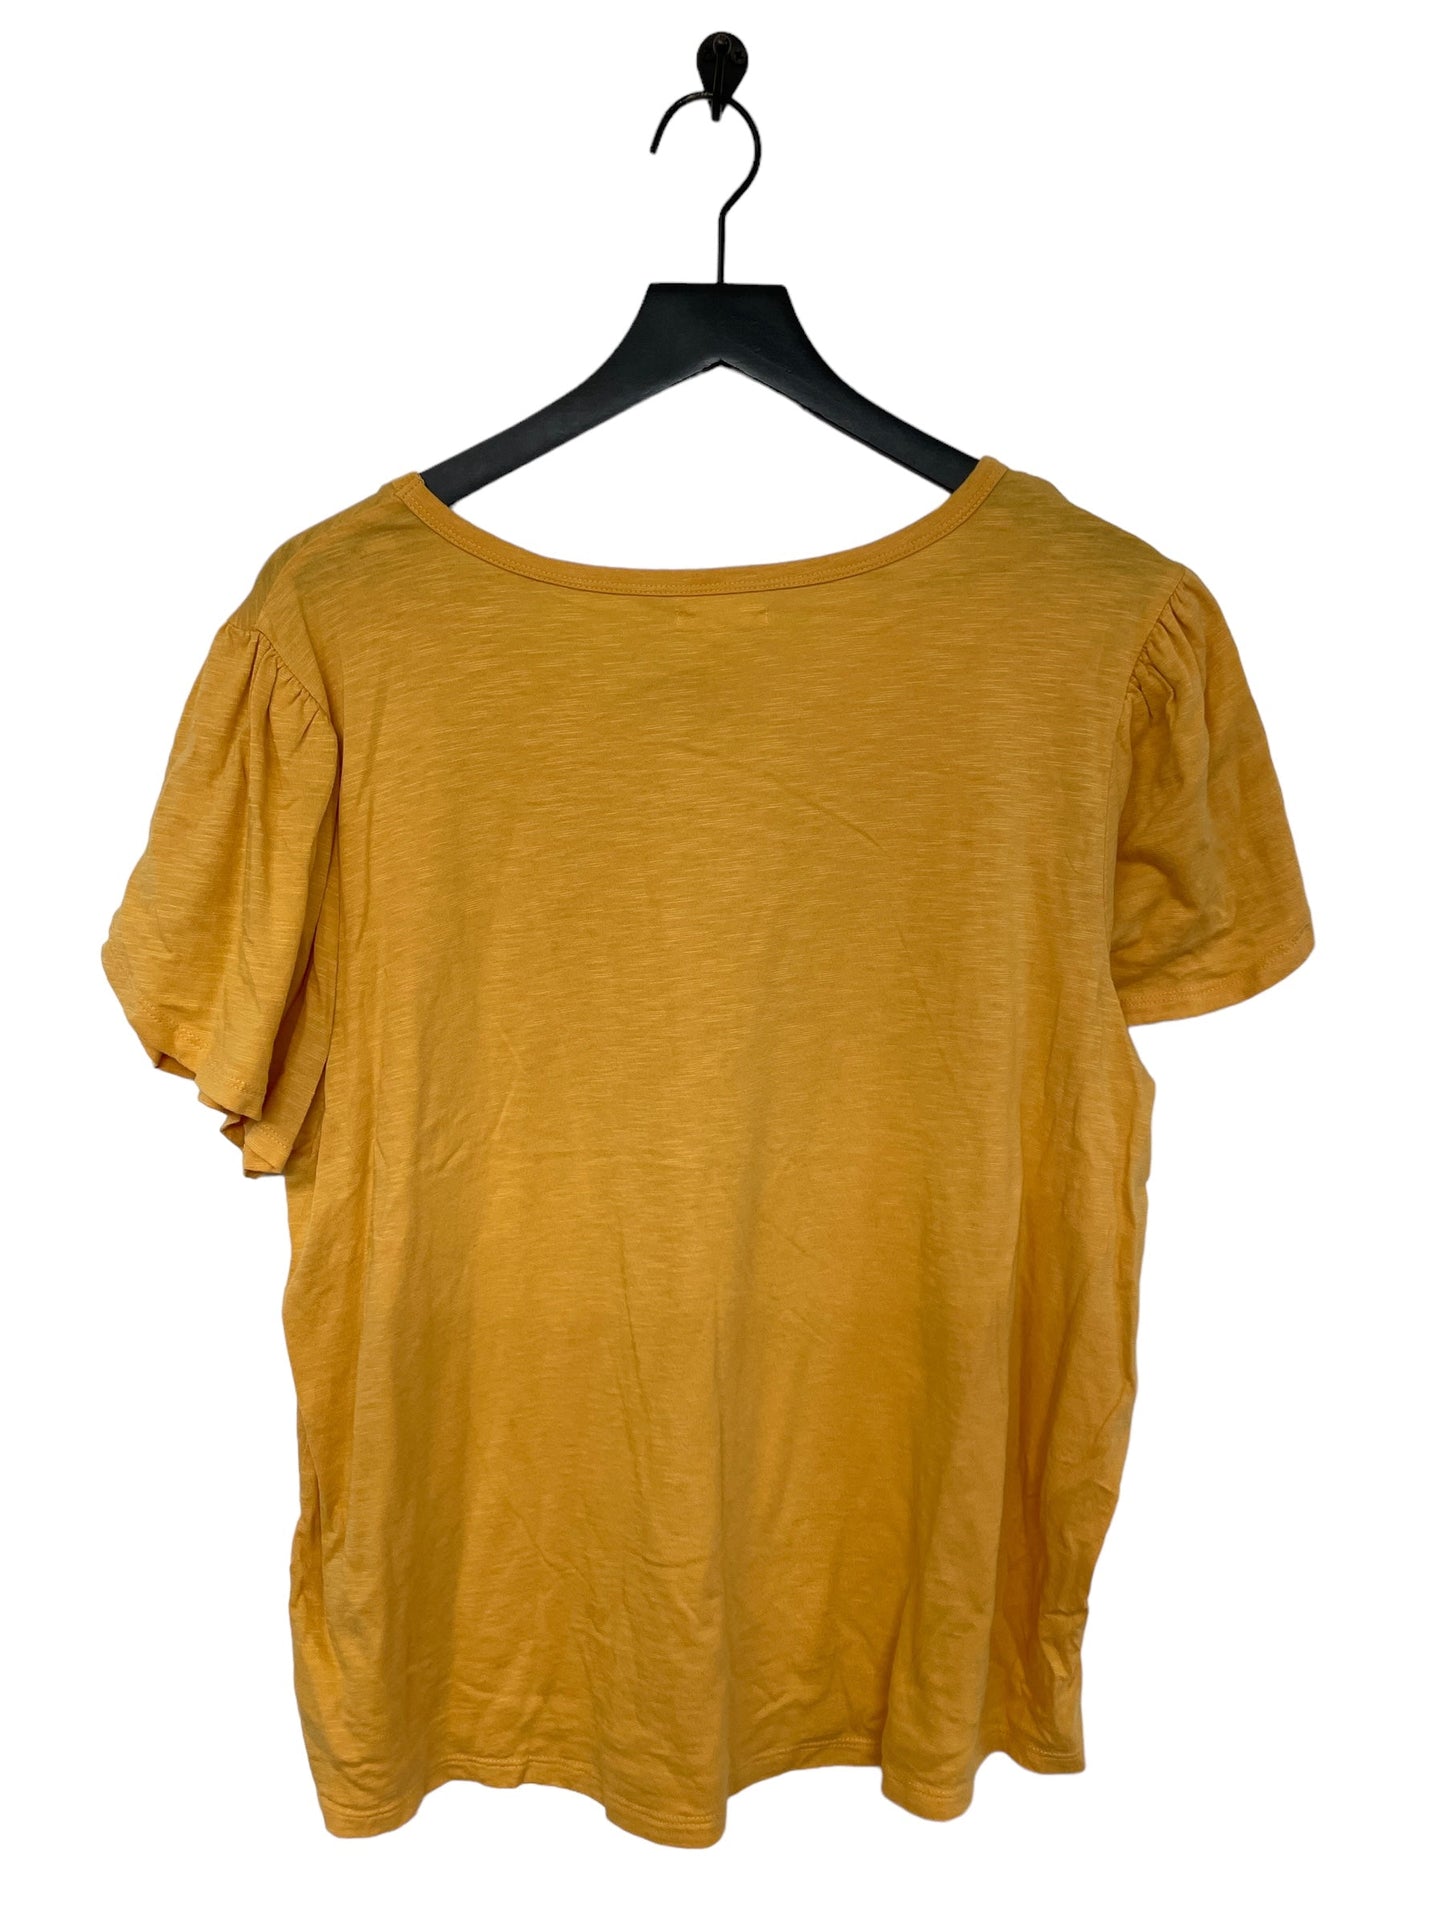 Yellow Top Short Sleeve Basic Maurices, Size Xxl